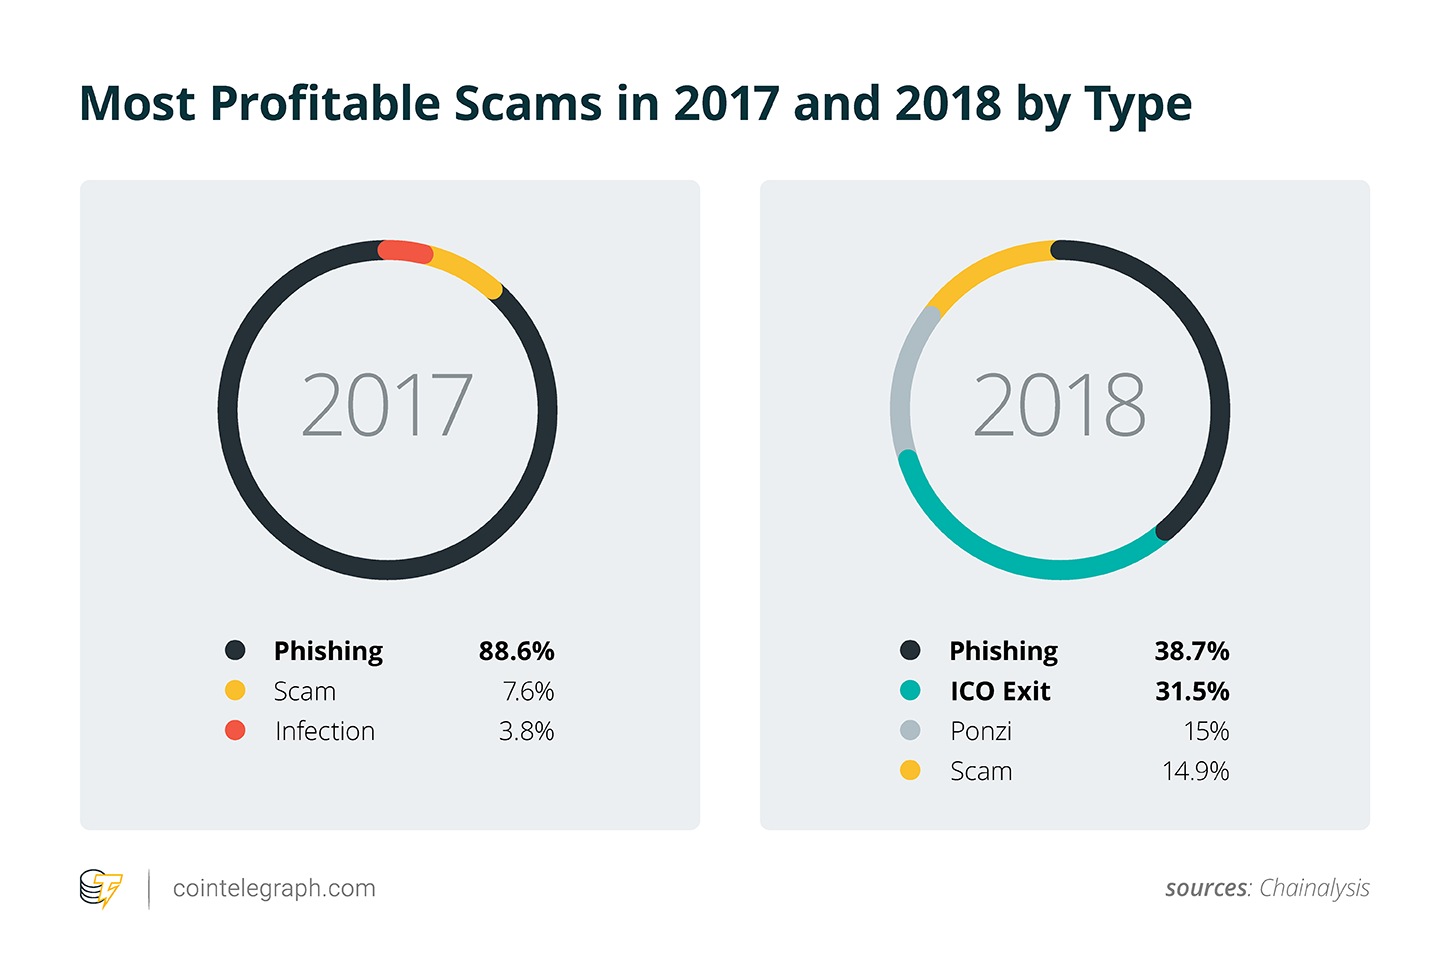 Most profitable scams in 2017 and 2018 by type